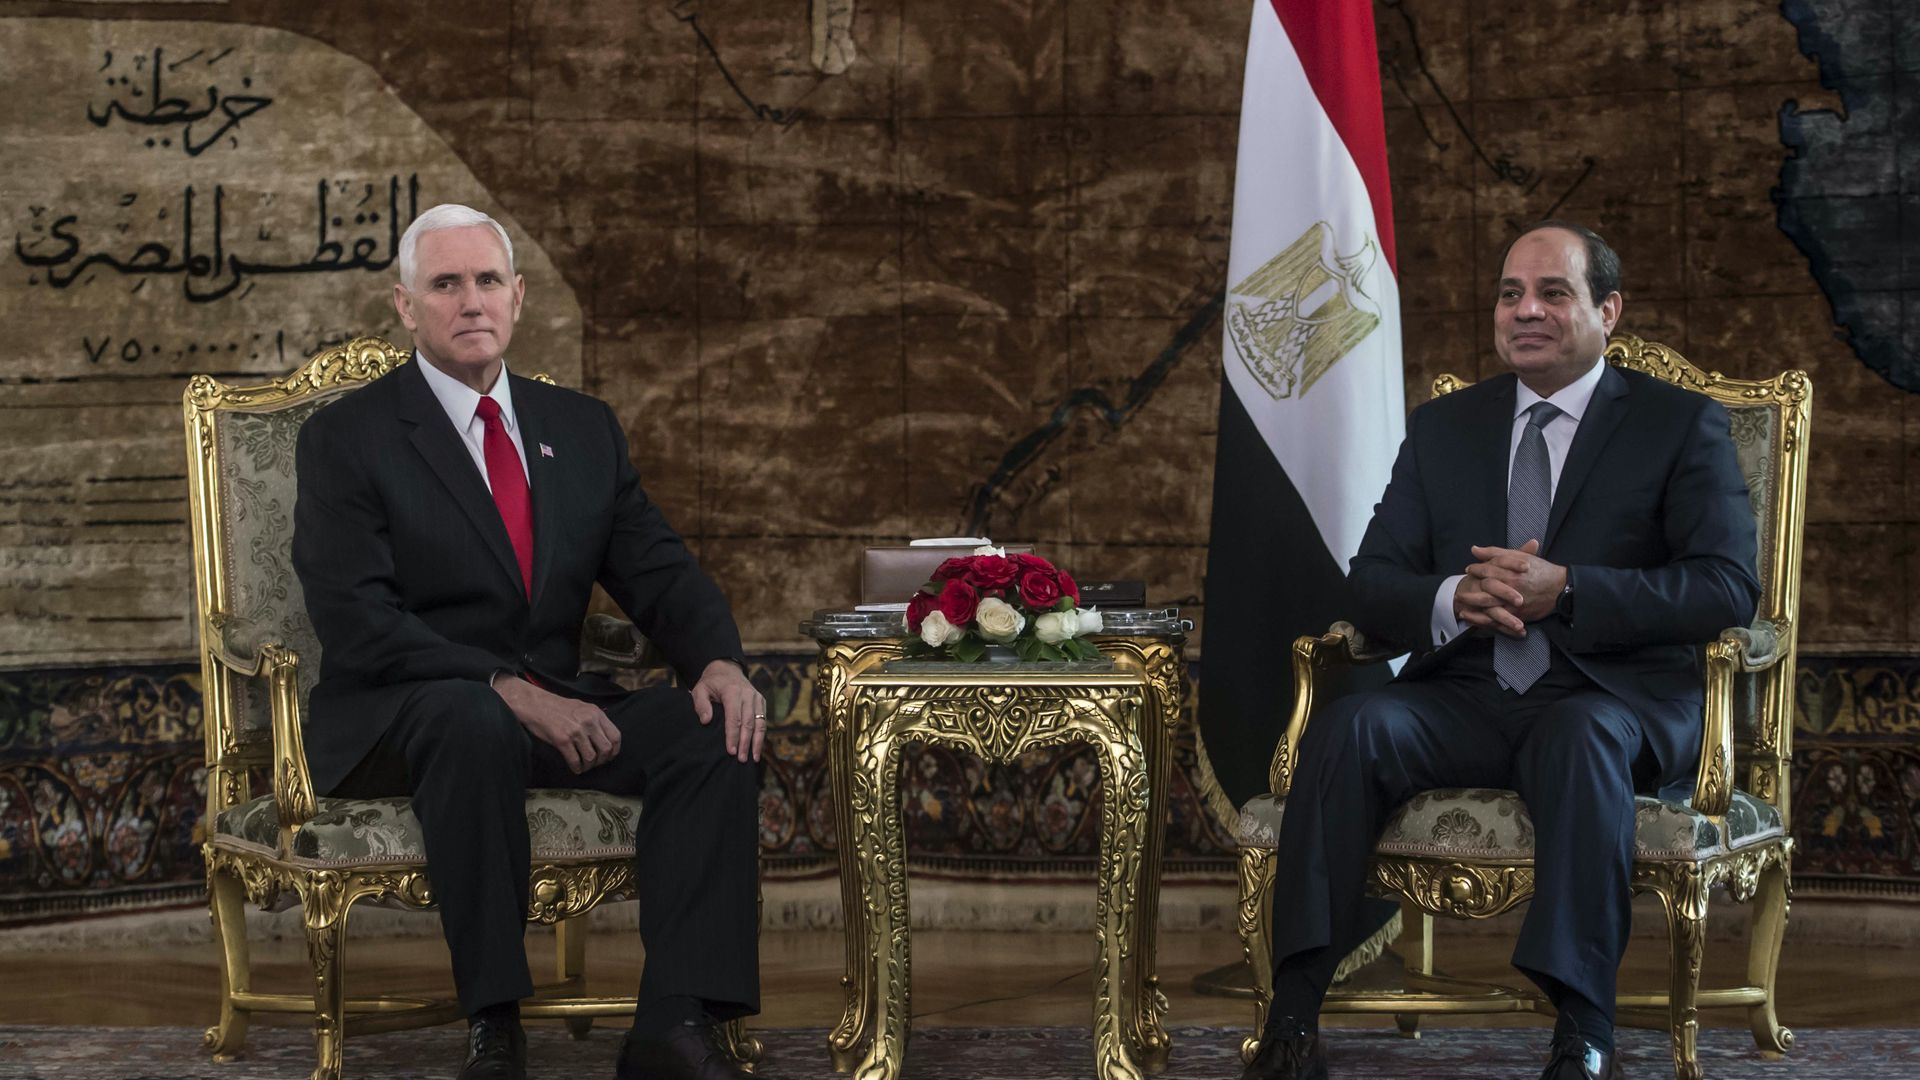 Egyptian President Abdel Fattah al-Sisi meets with Vice President Mike Pence.